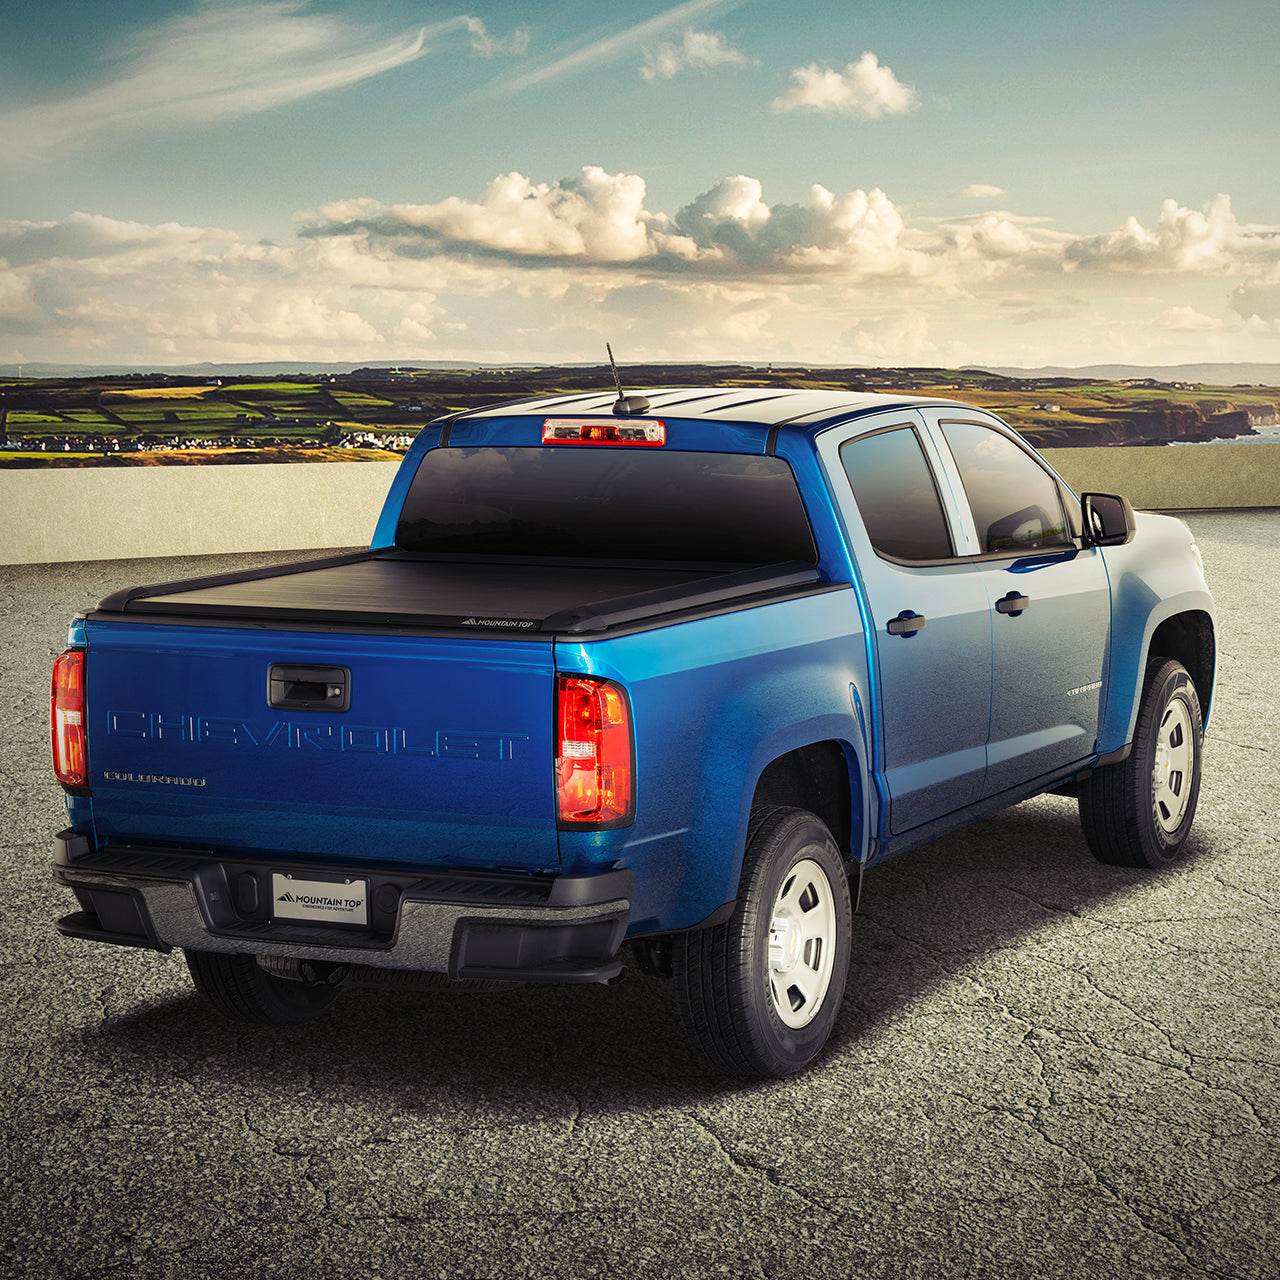 Mountain Top Retractable Roll Cover fitted on a Blue Chevy Colorado